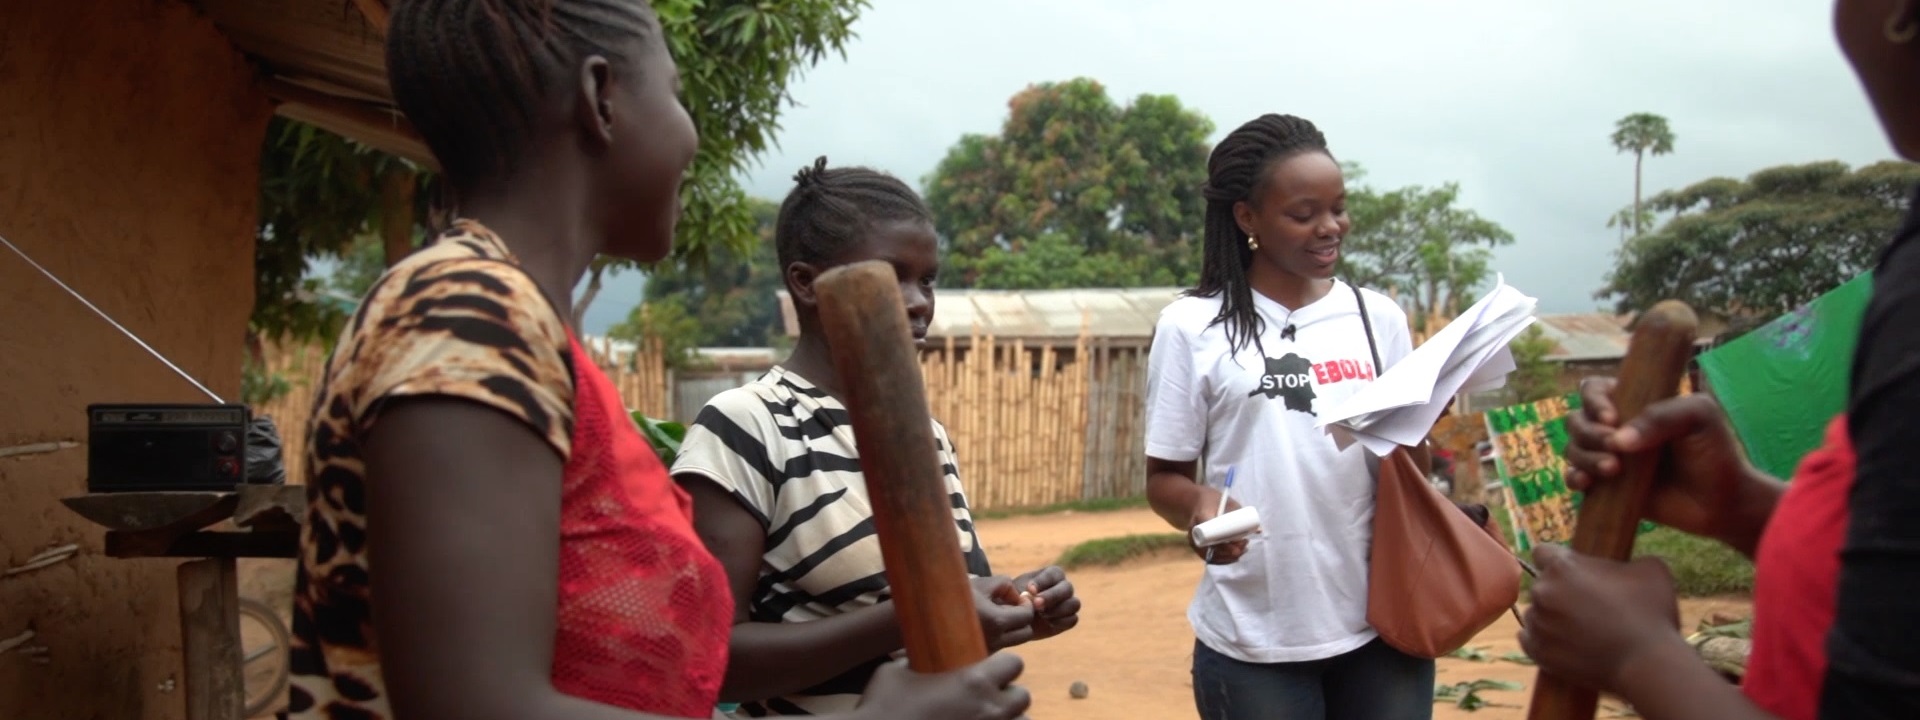 Ebola community health workers trained for the future